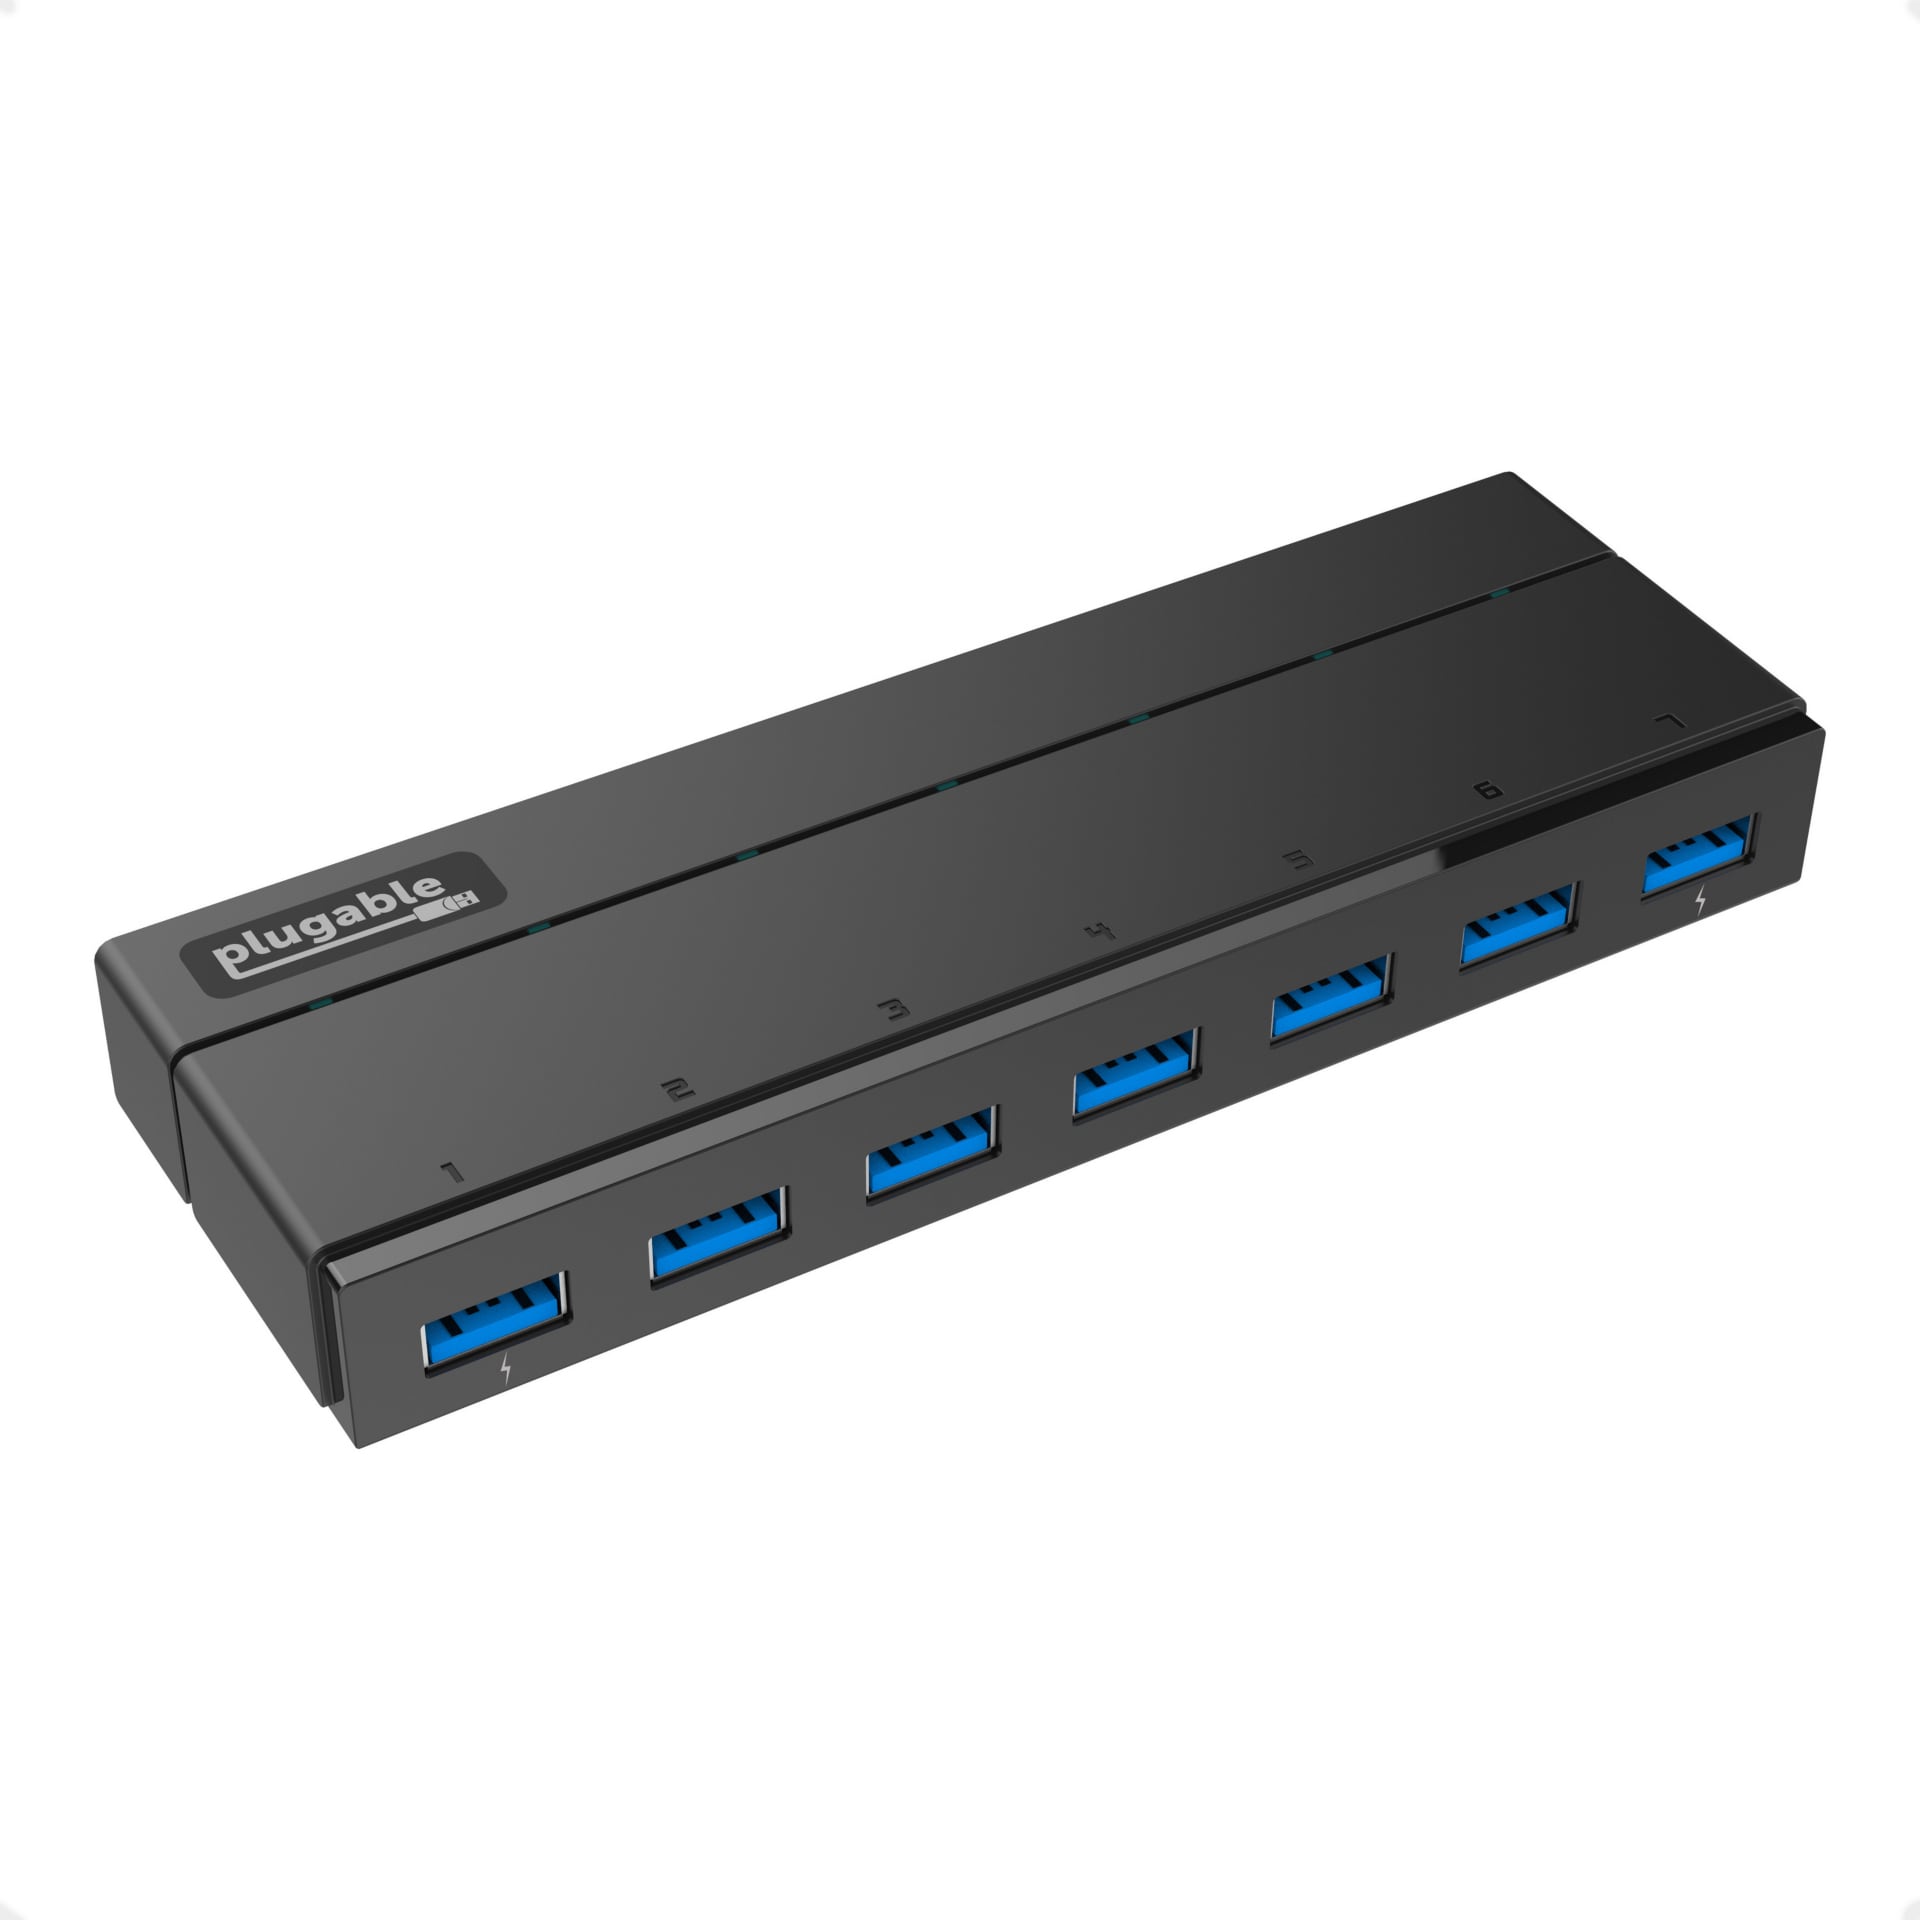 Plugable 7-Port USB 3.0 Hub w/ 36W Power Adapter, Connect up to 7 USB 3.0,2.0,or 1.1 Devices to Single Port,Driverless